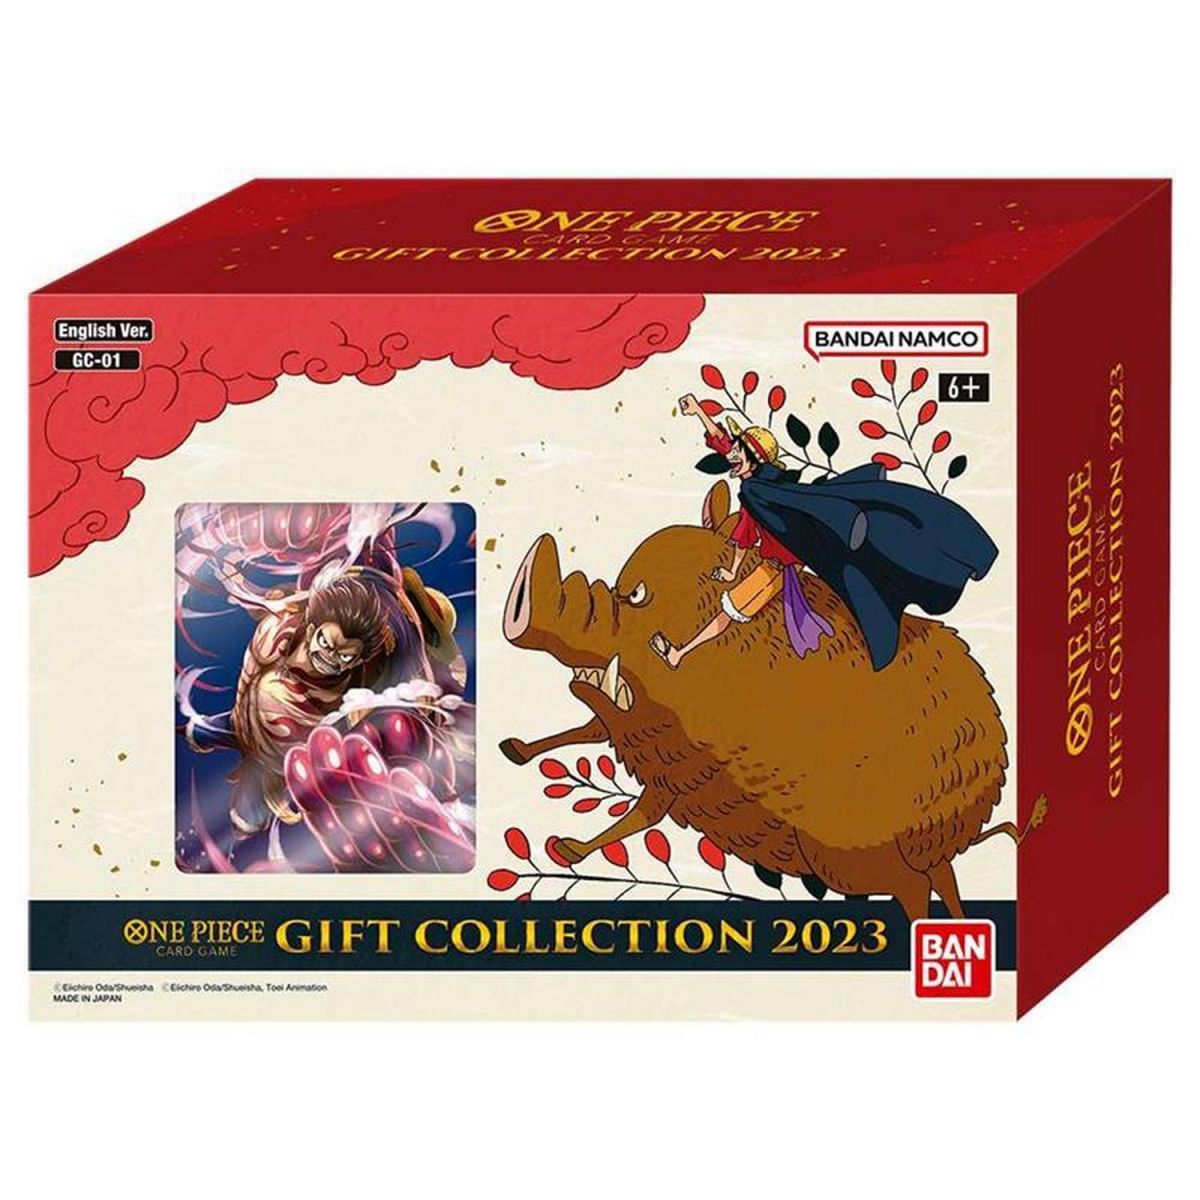 Item One Piece CG - Box Set - Gift Collection 2023 - Kingdoms of Intrigue OP-04 - EN